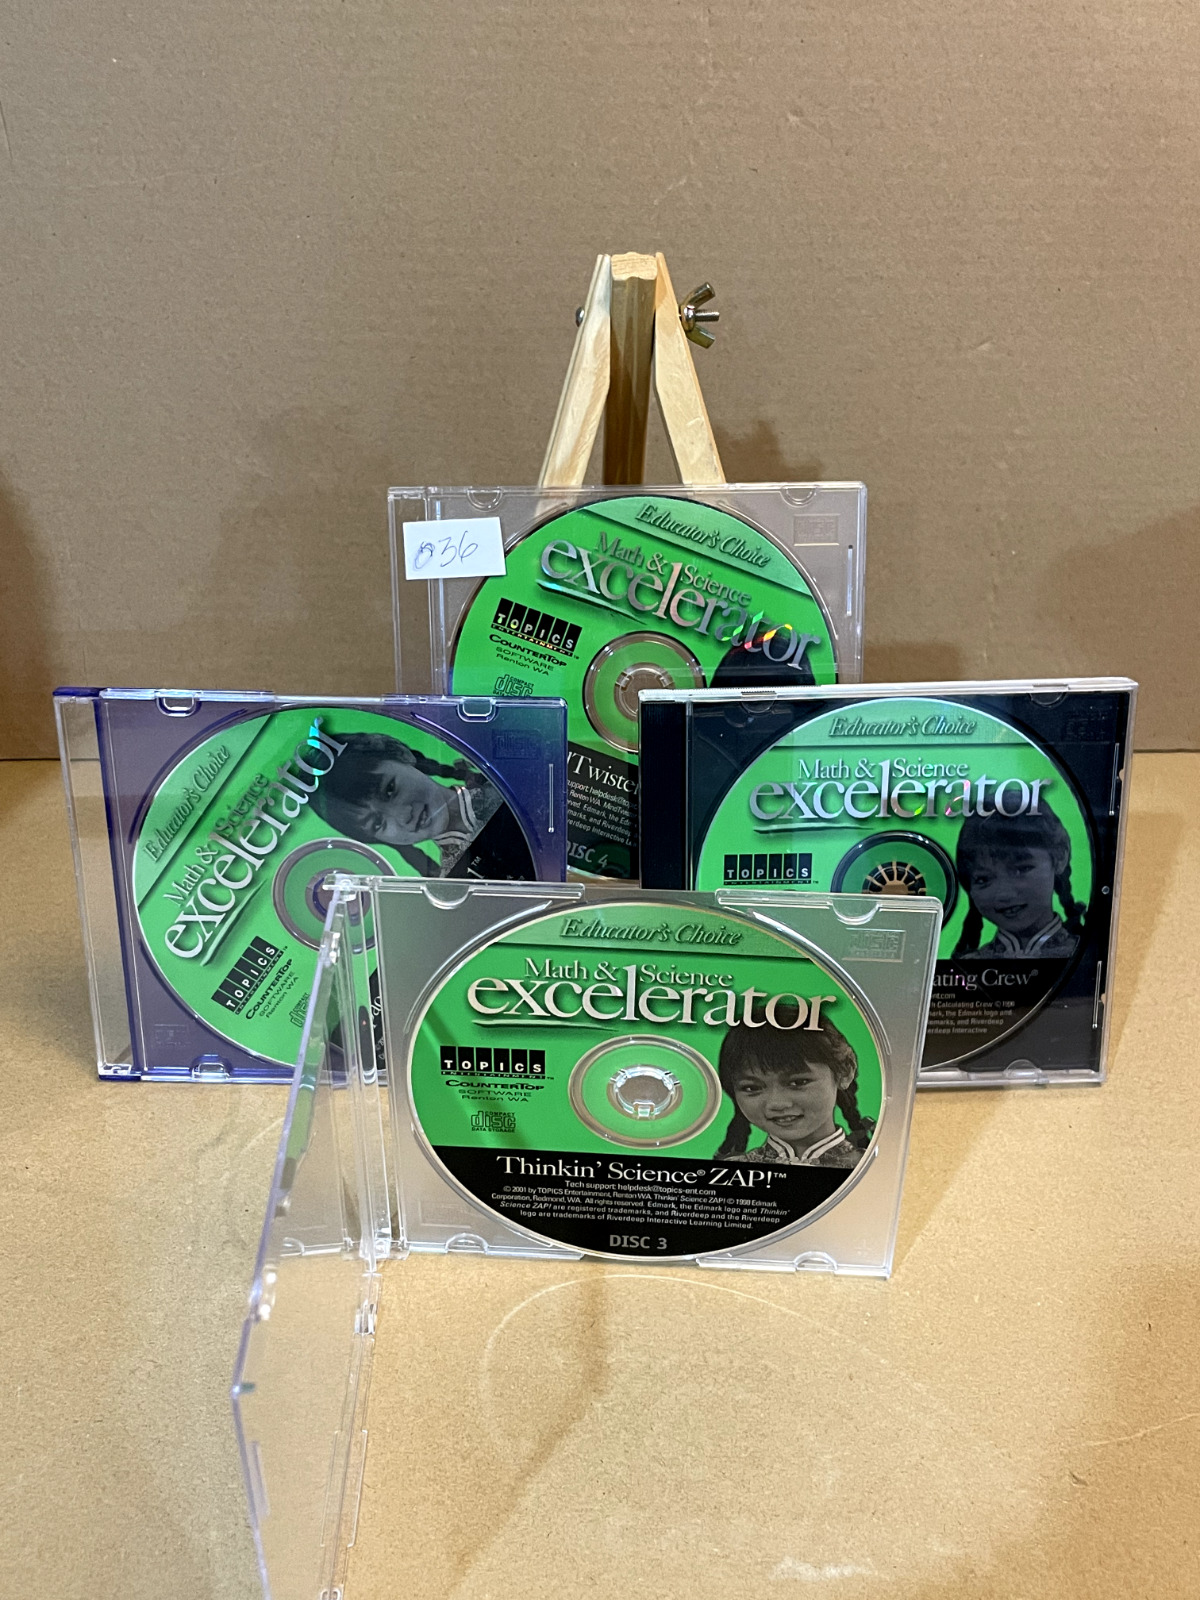 Math and Science Excelerator 4 Disc Educator Choice Excel Program 2001 CD-ROM